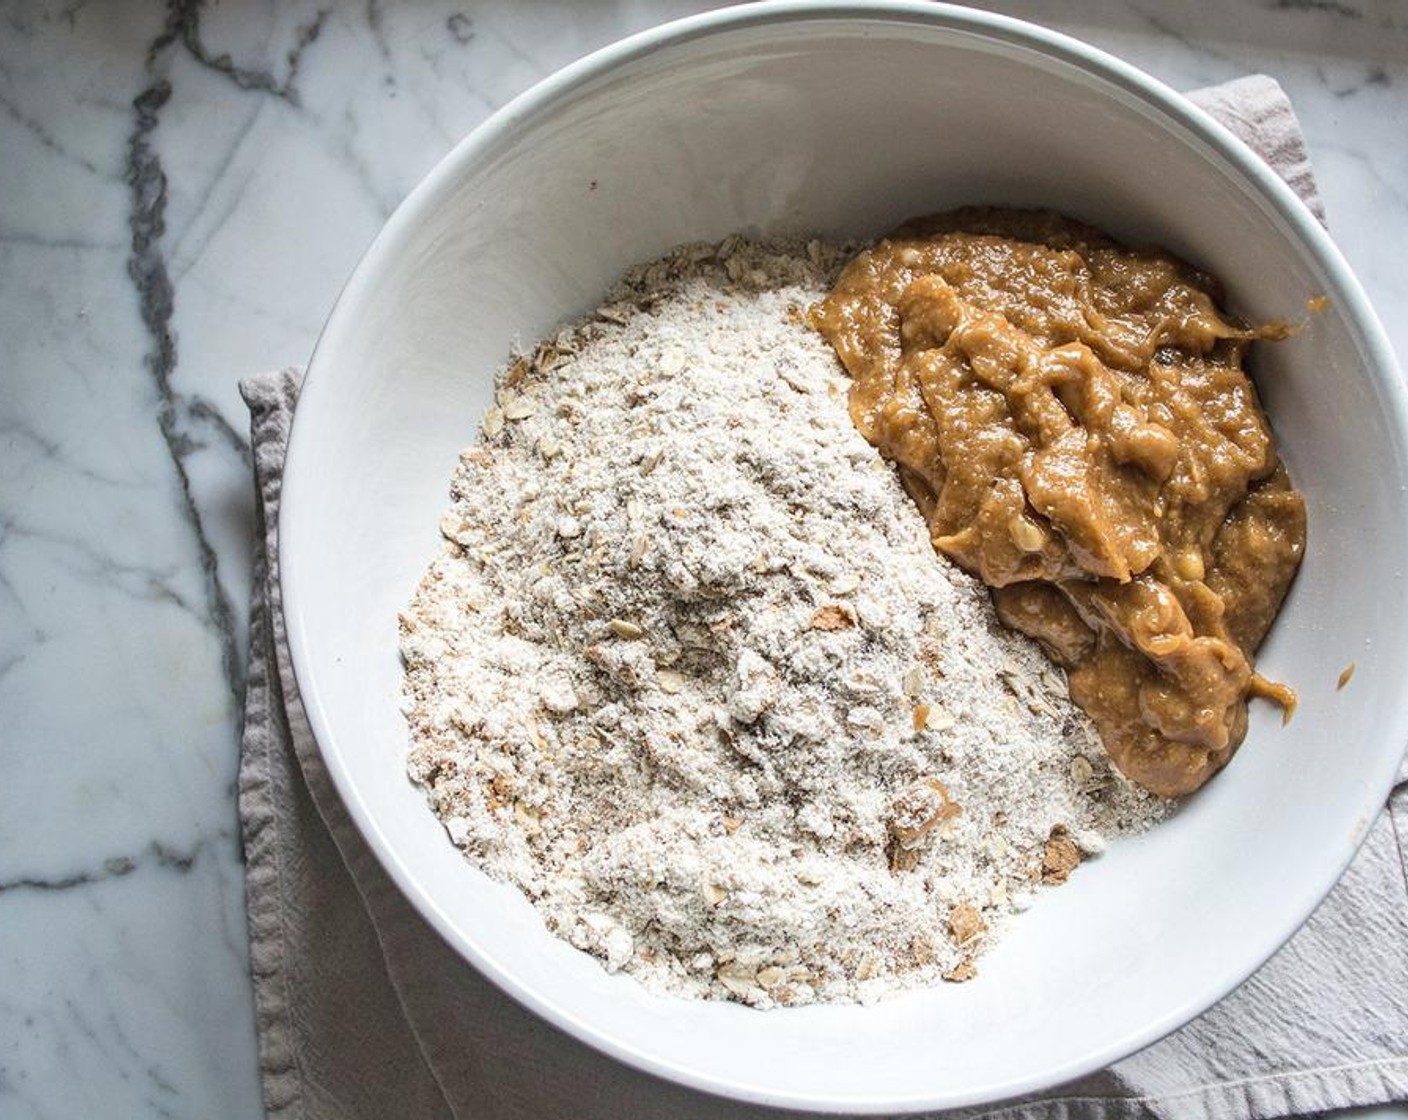 step 2 In a large bowl, mix Ground Oats (2 cups), Old Fashioned Rolled Oats (1 cup), Bran Flakes (1 cup), Flaxseeds (1/4 cup) and Protein Powder (1 cup) together.